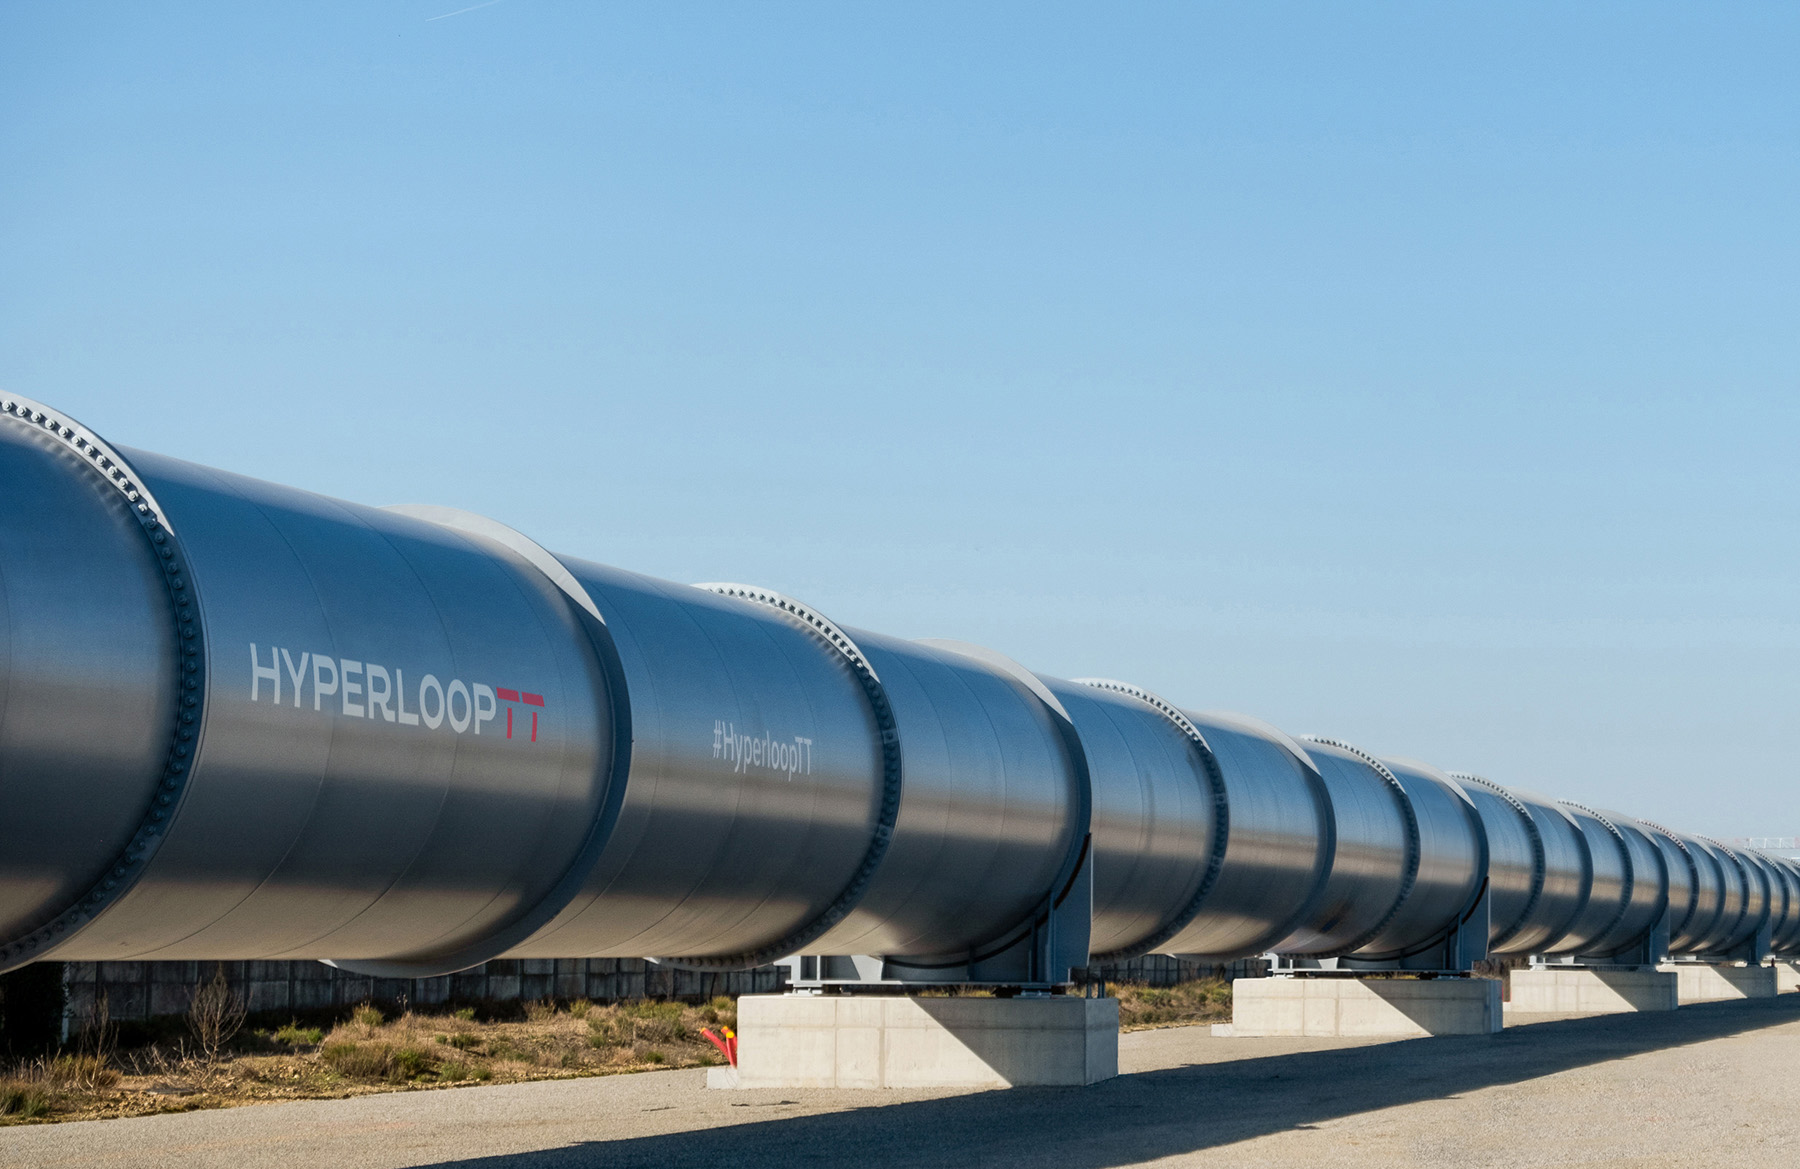 Steel semicircular tube with the word HyperloopTT on the side.